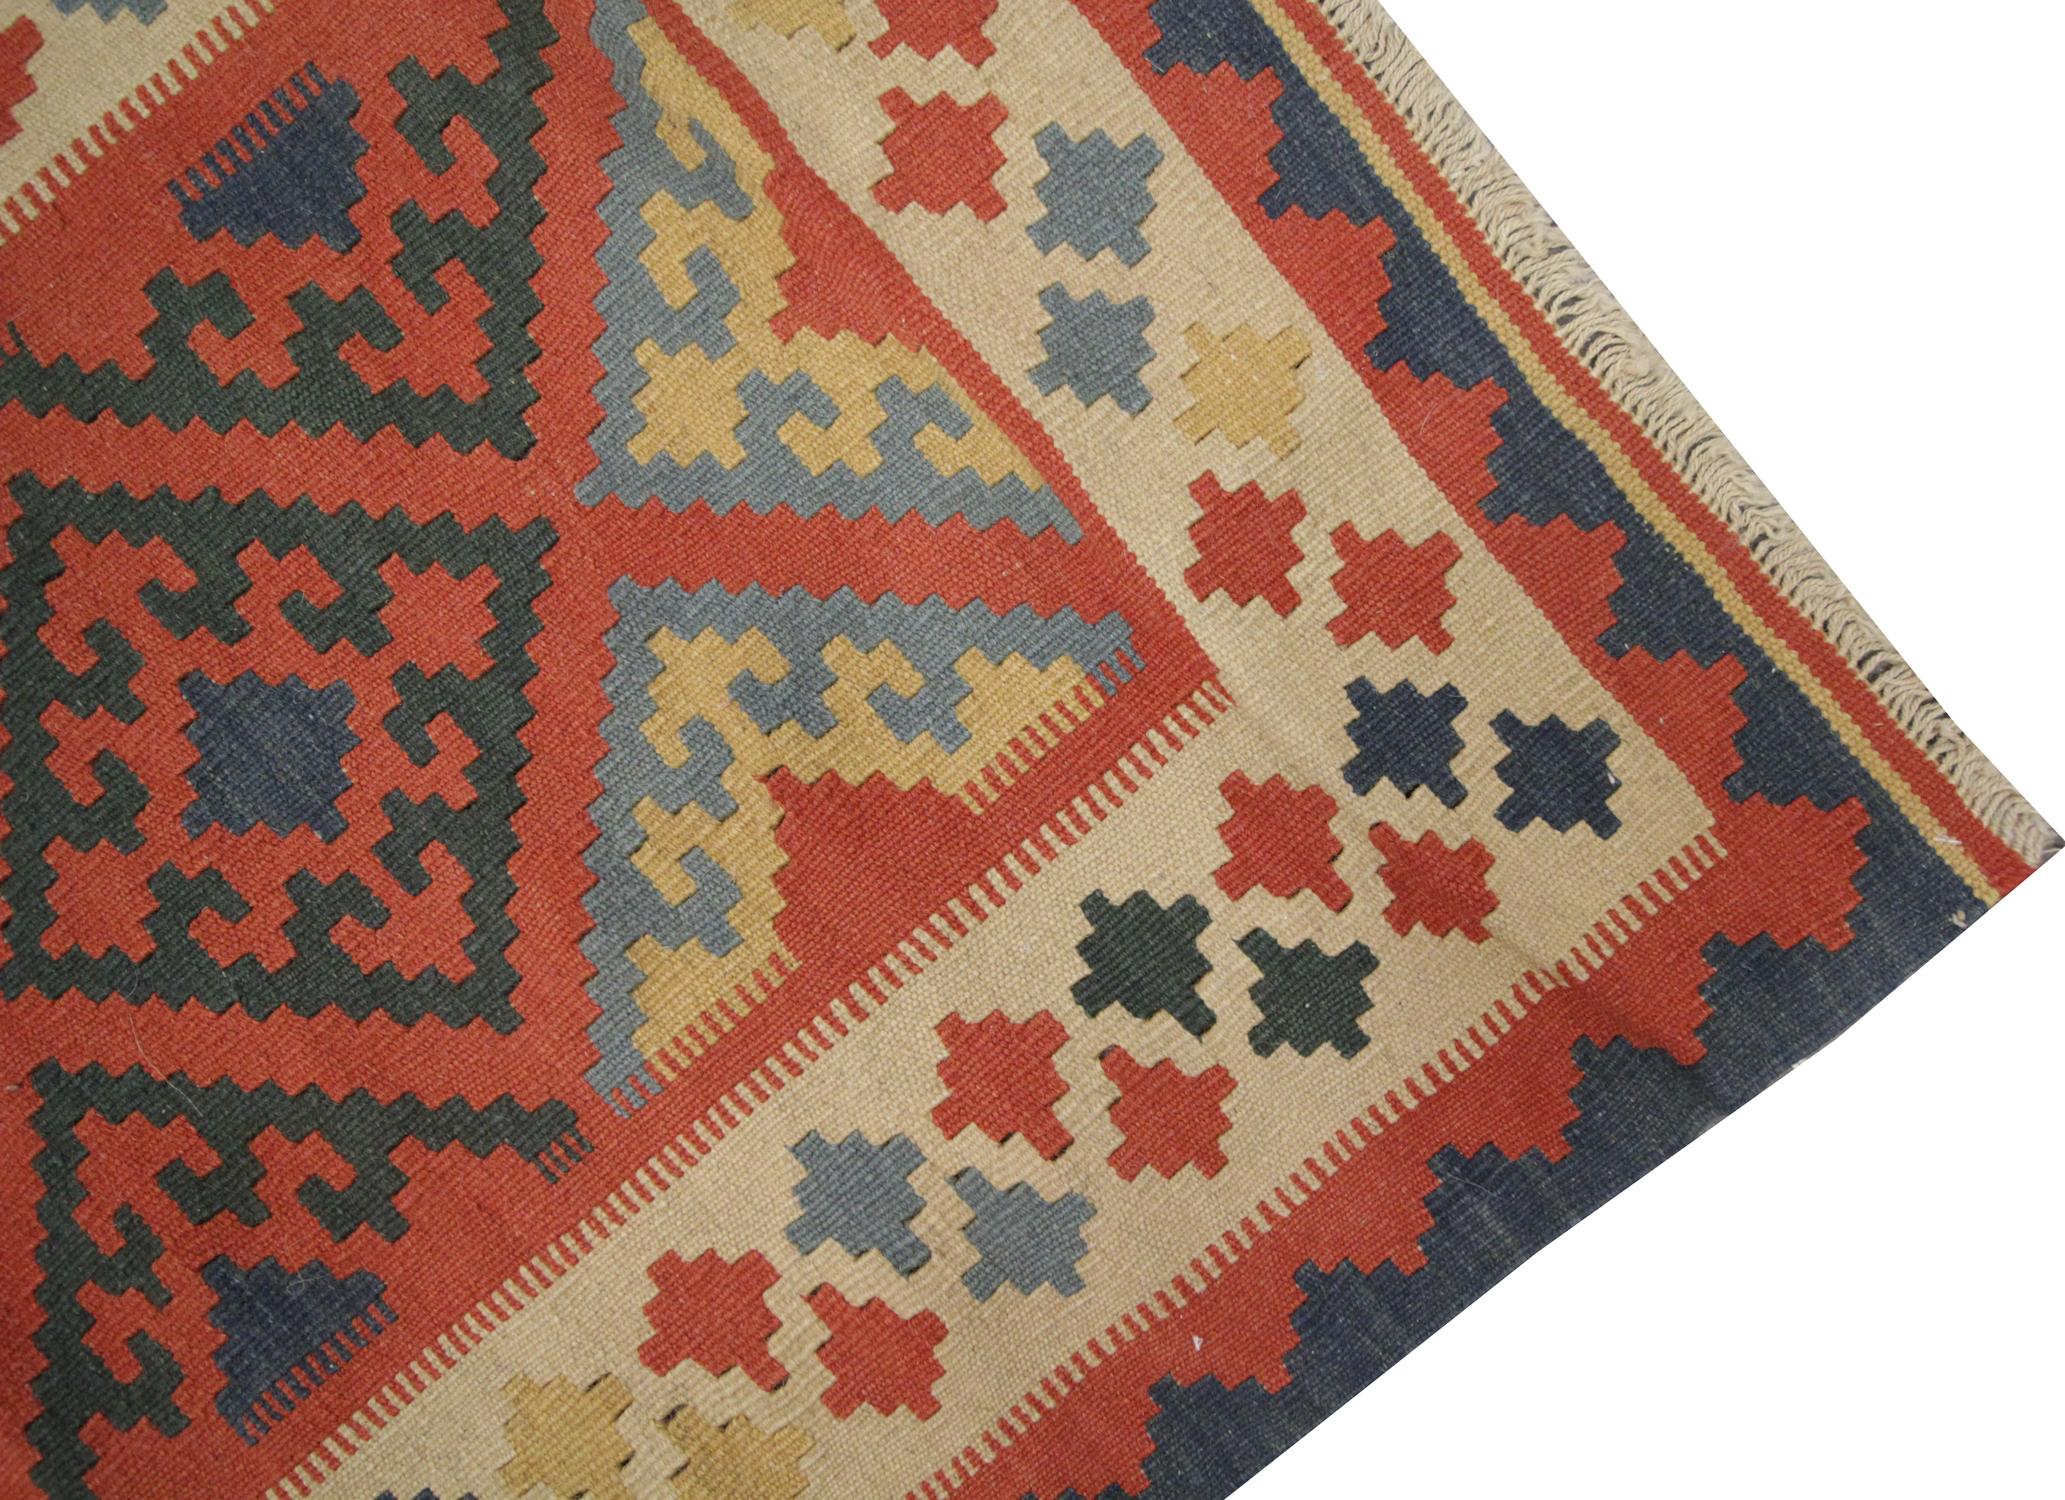 Vintage Kilim Runner Rug Handwoven Oriental Orange Wool Area Rug In Excellent Condition For Sale In Hampshire, GB